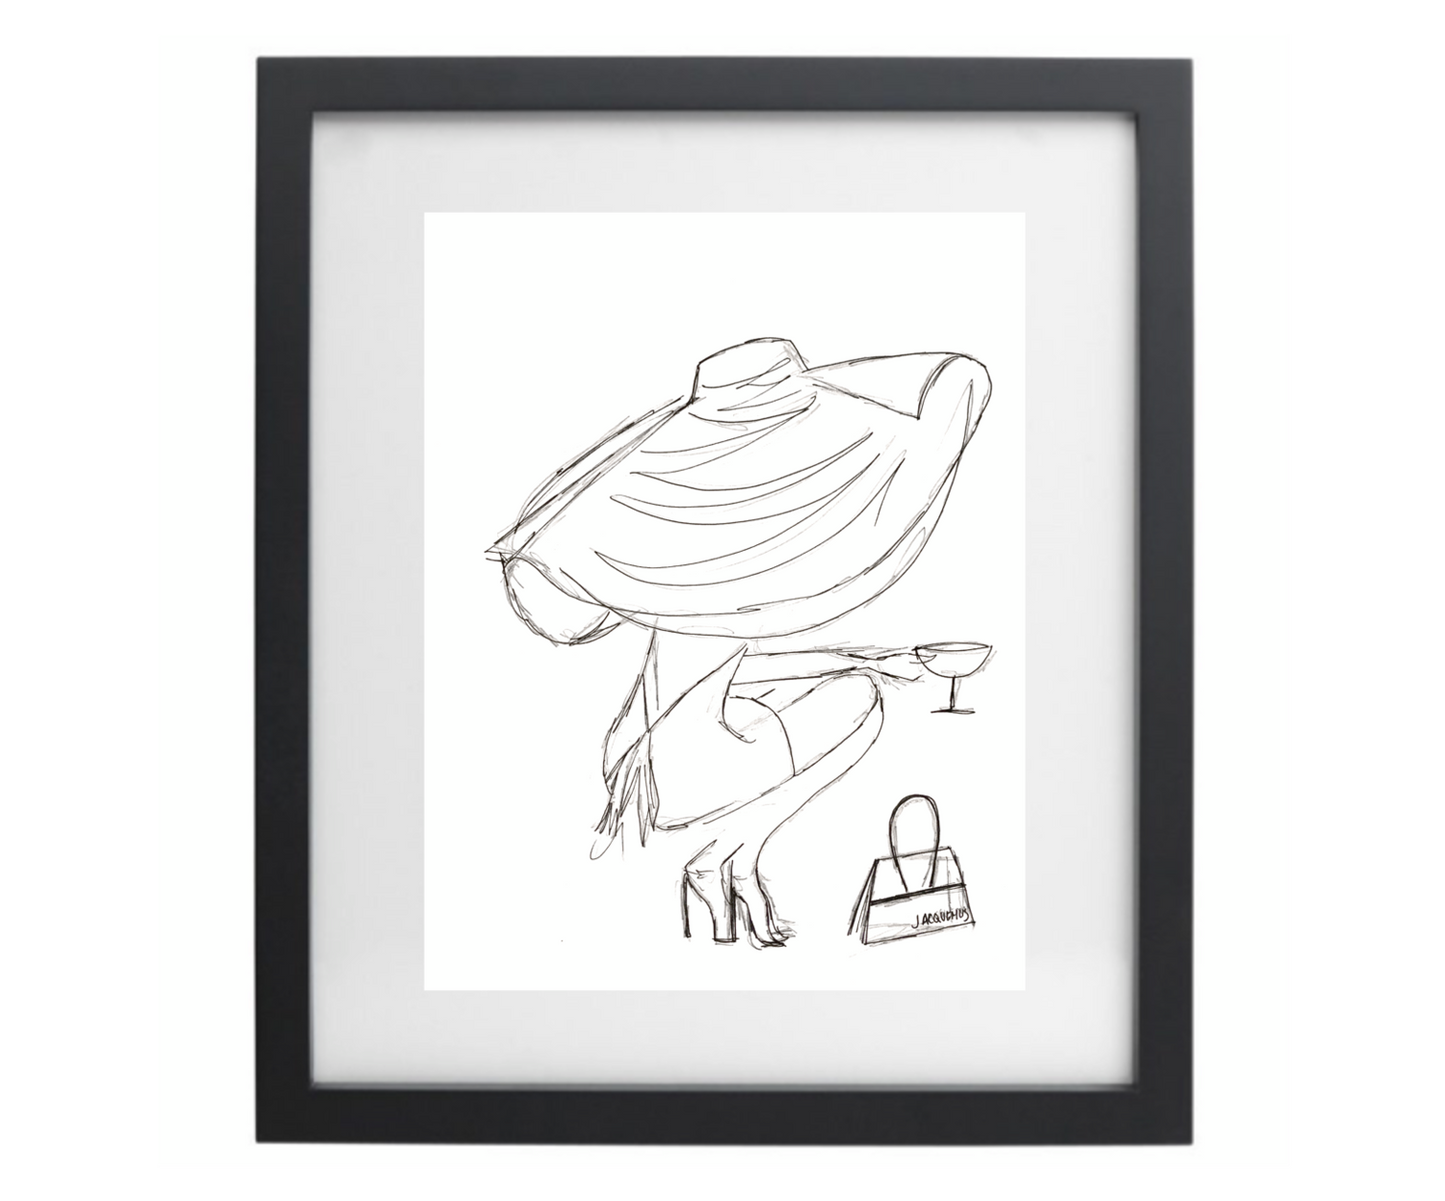 Big floppy sunhat black and white sketch in a black frame